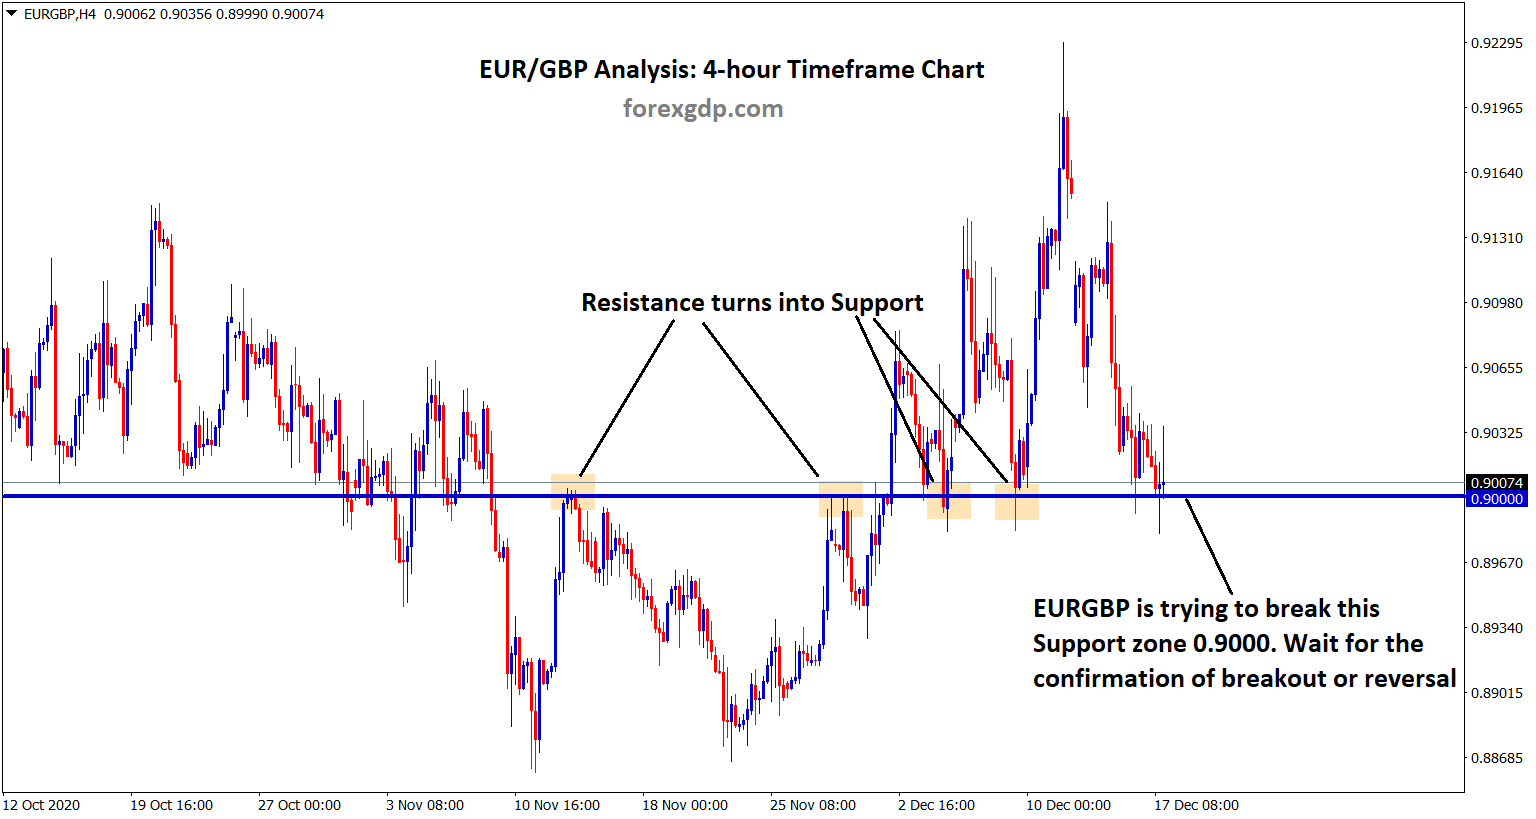 eurgbp resistance turns into support waiting for breakout